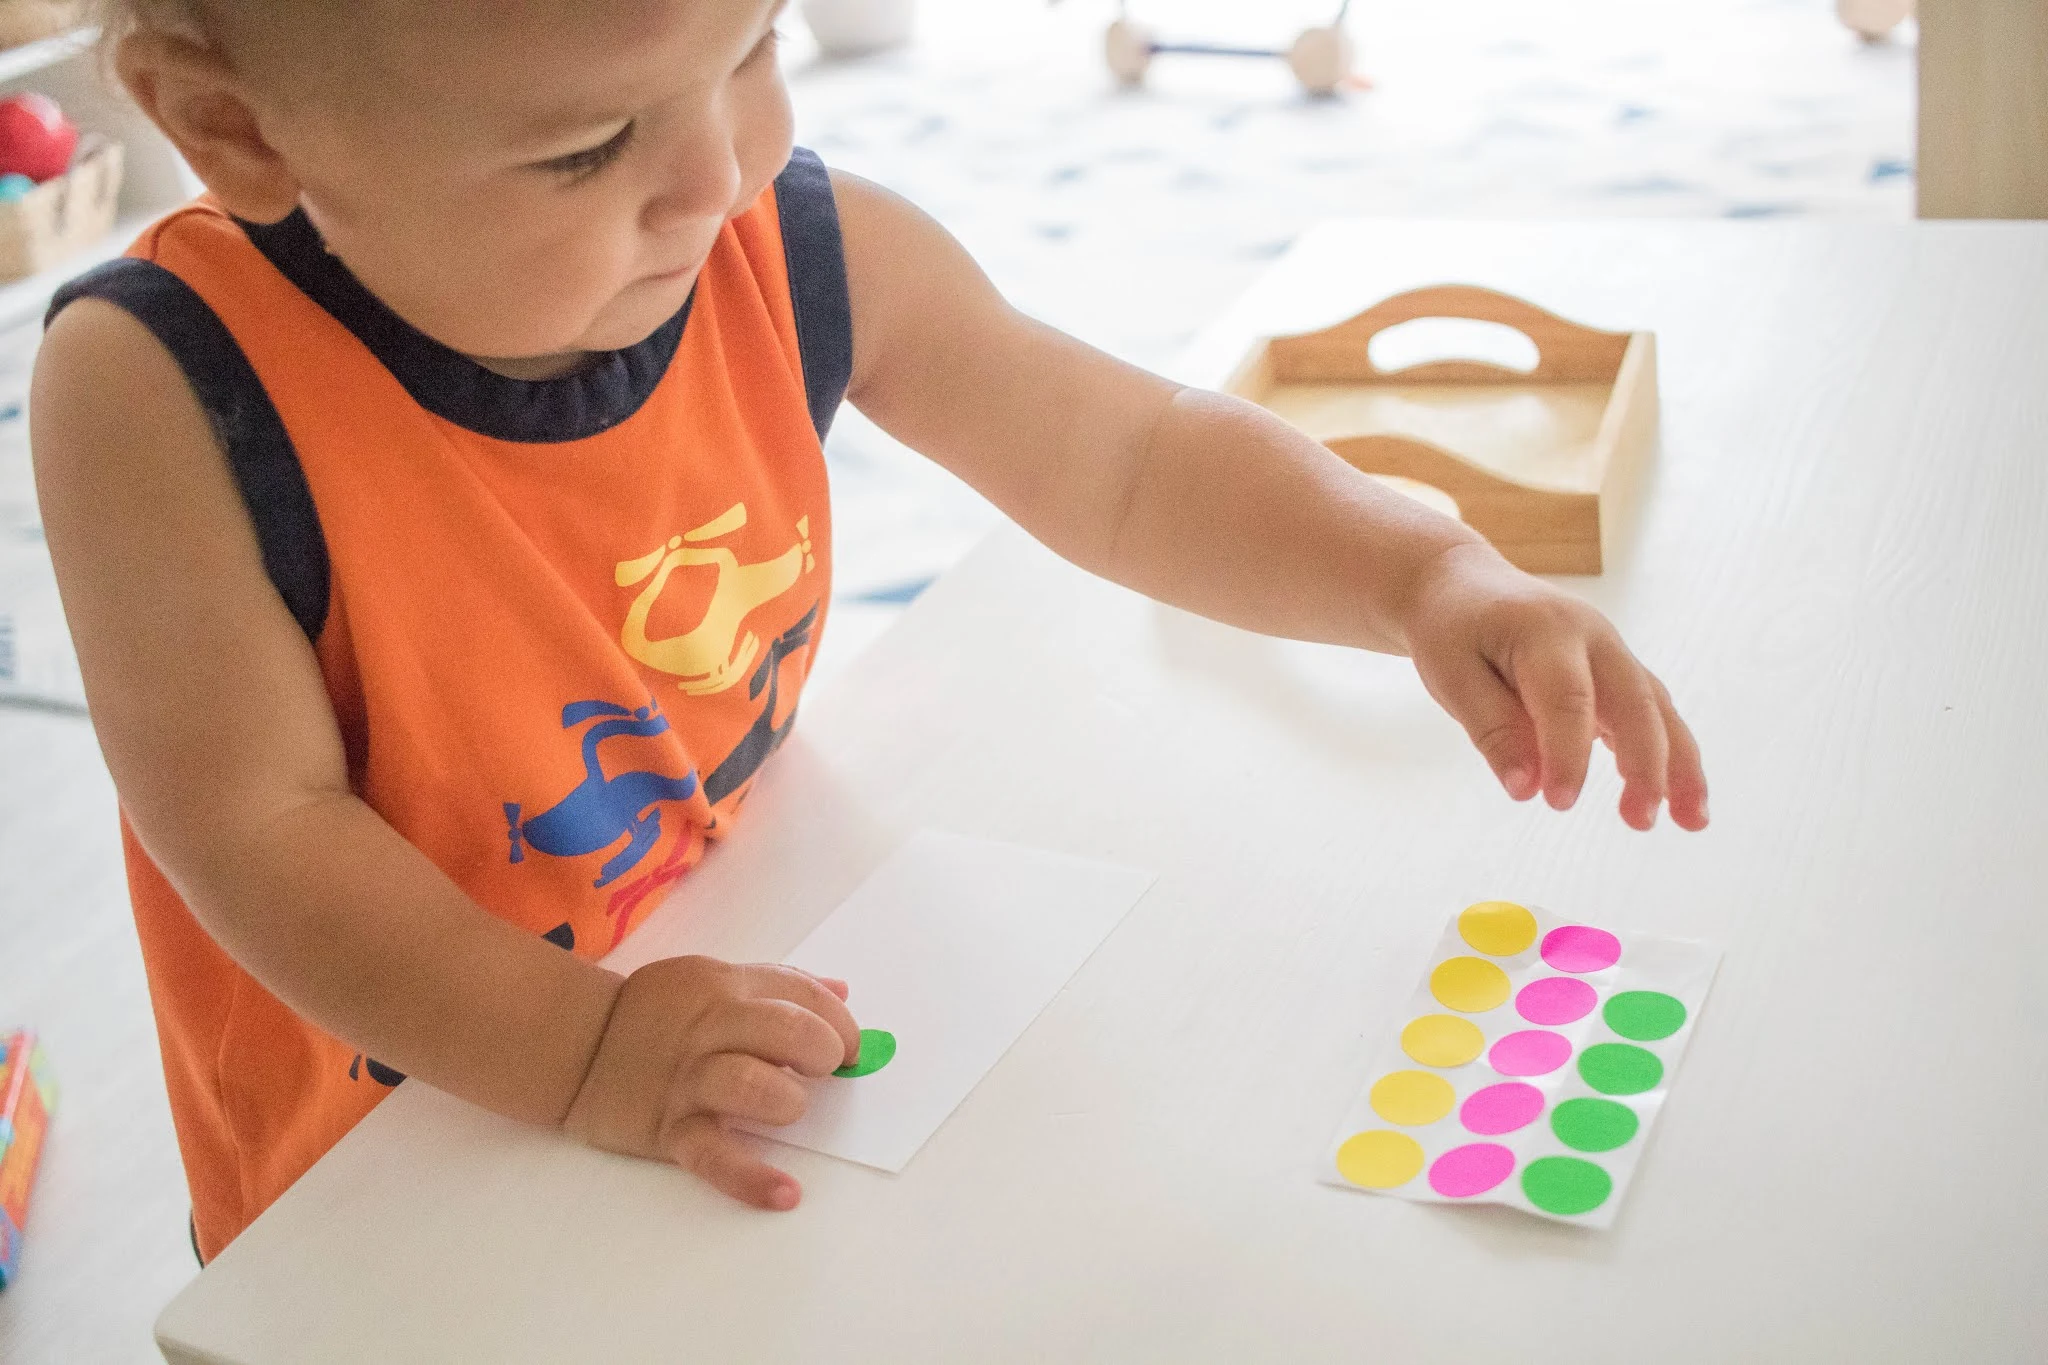 Young Montessori toddler places stickers on a paper while working with art material